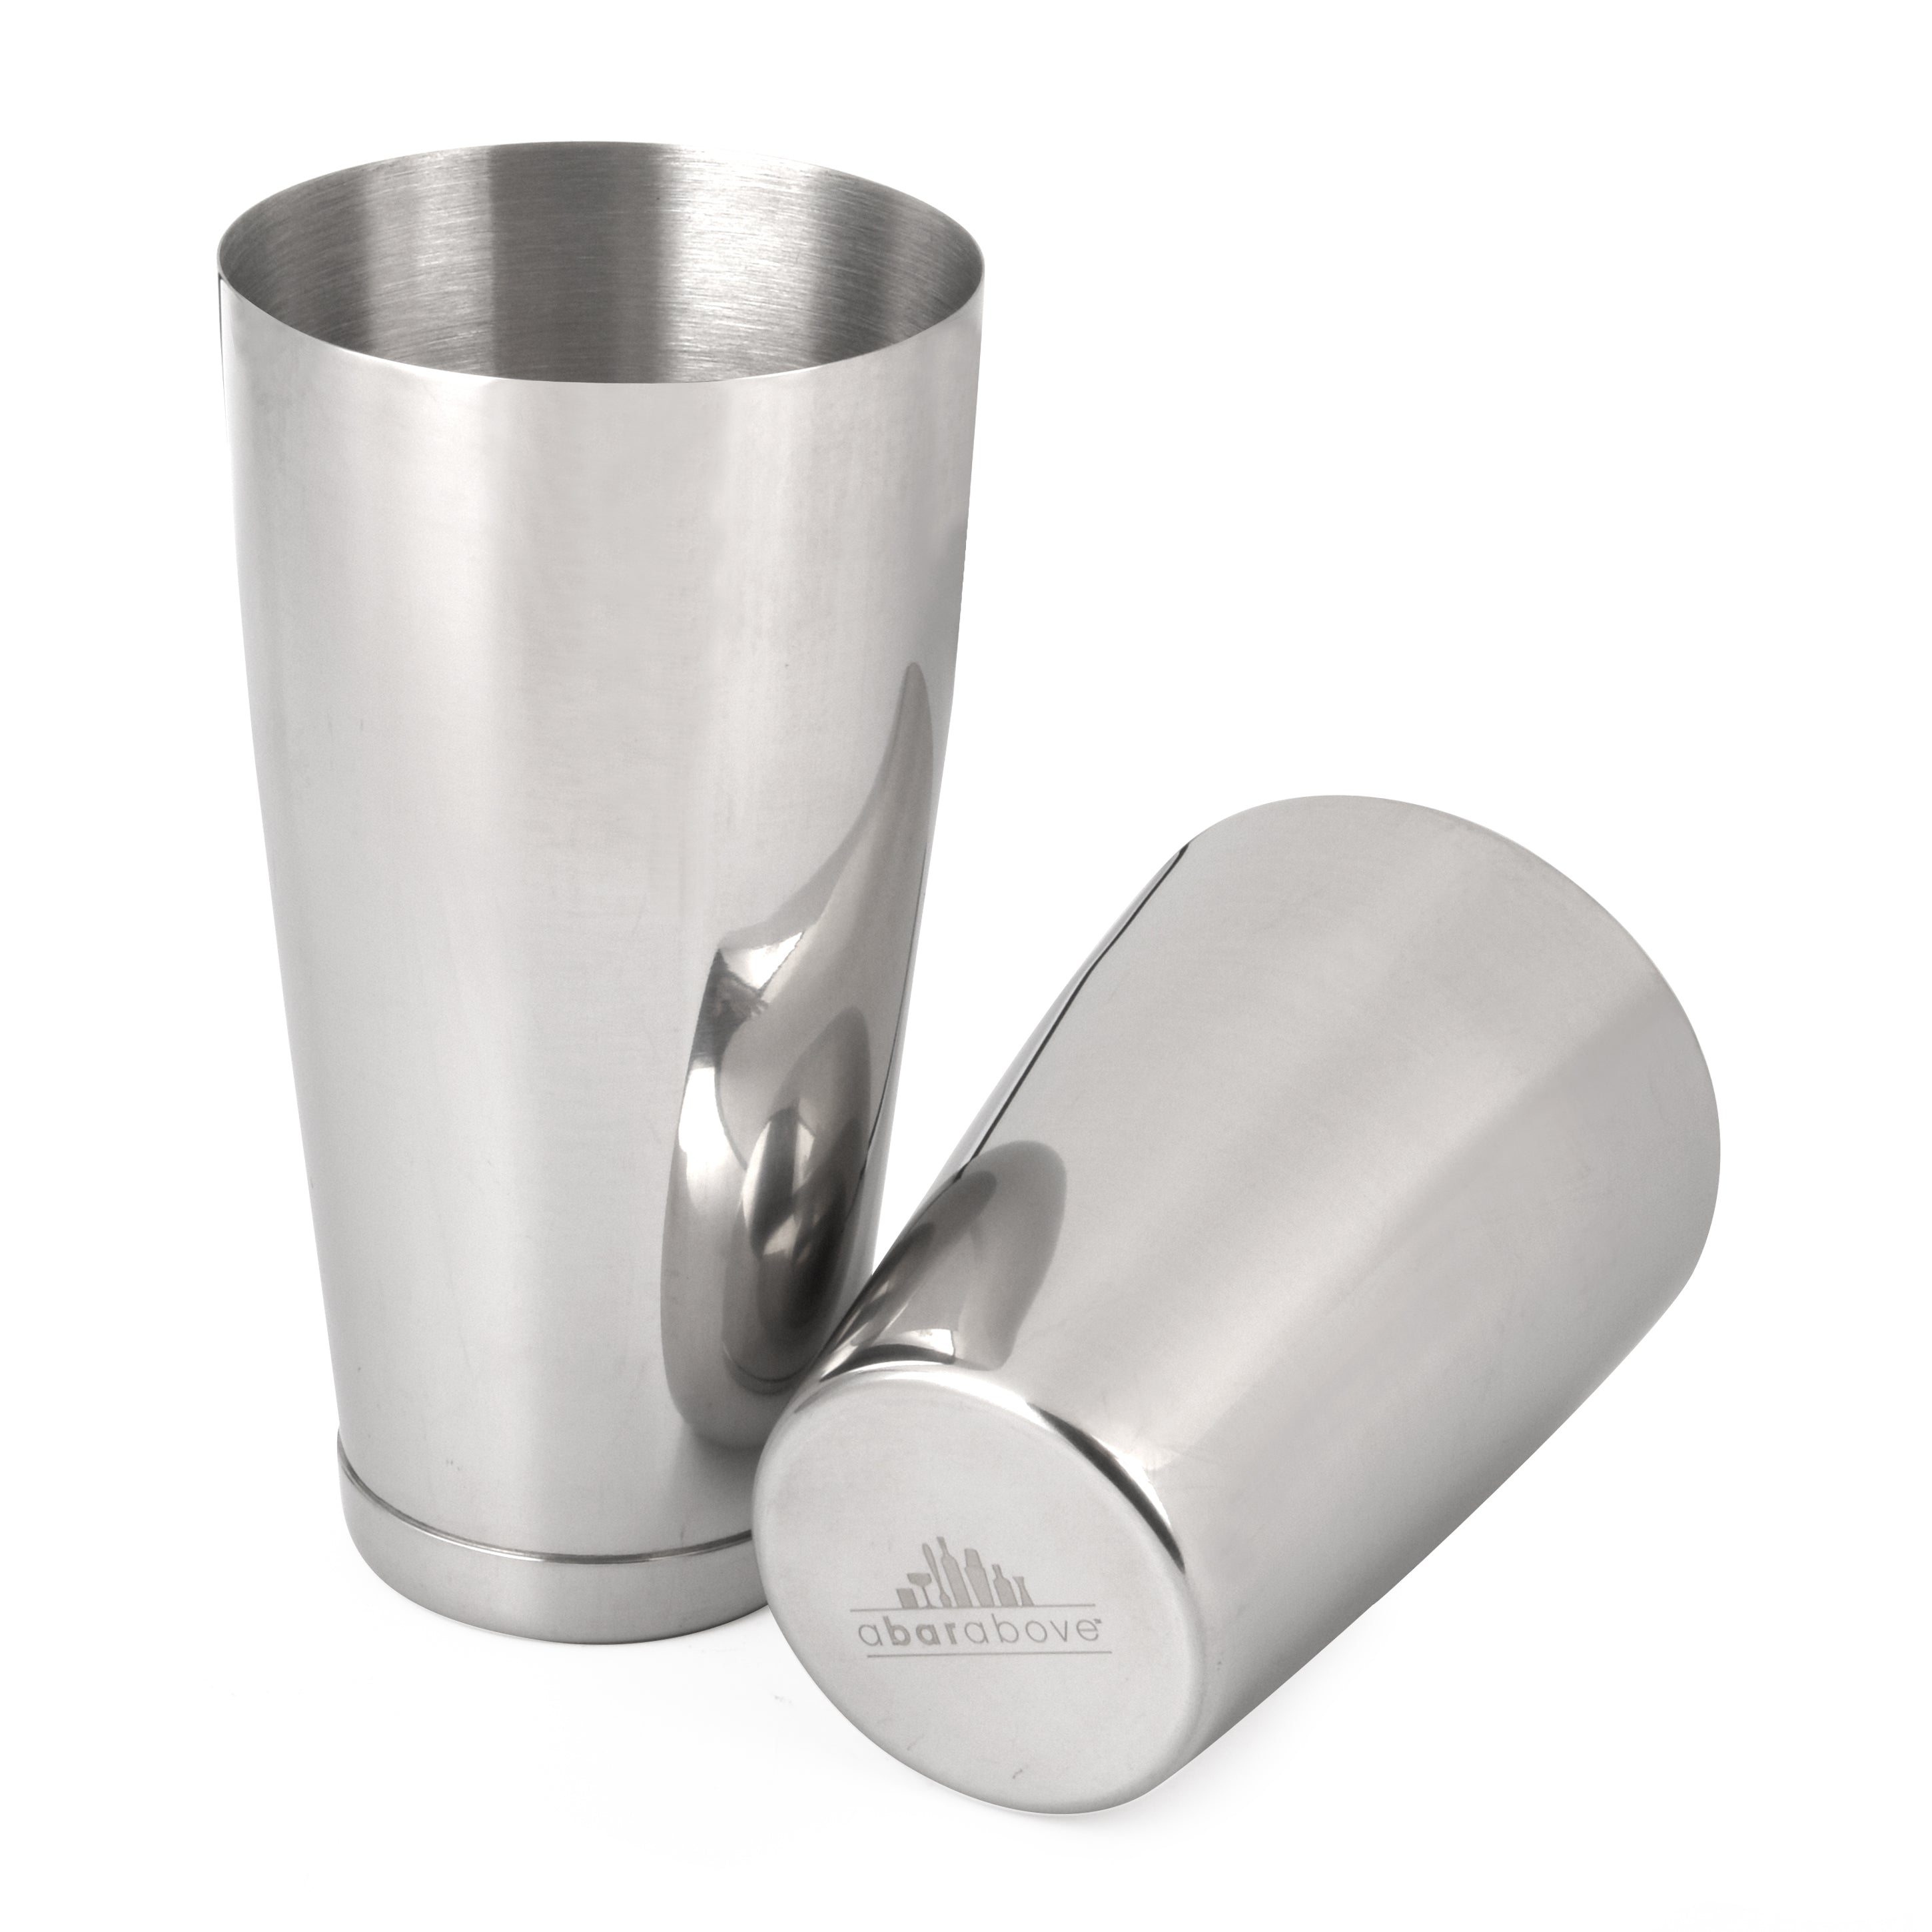 6 Best Cocktail Shakers Of 2023 - Cocktail Shaker Reviews